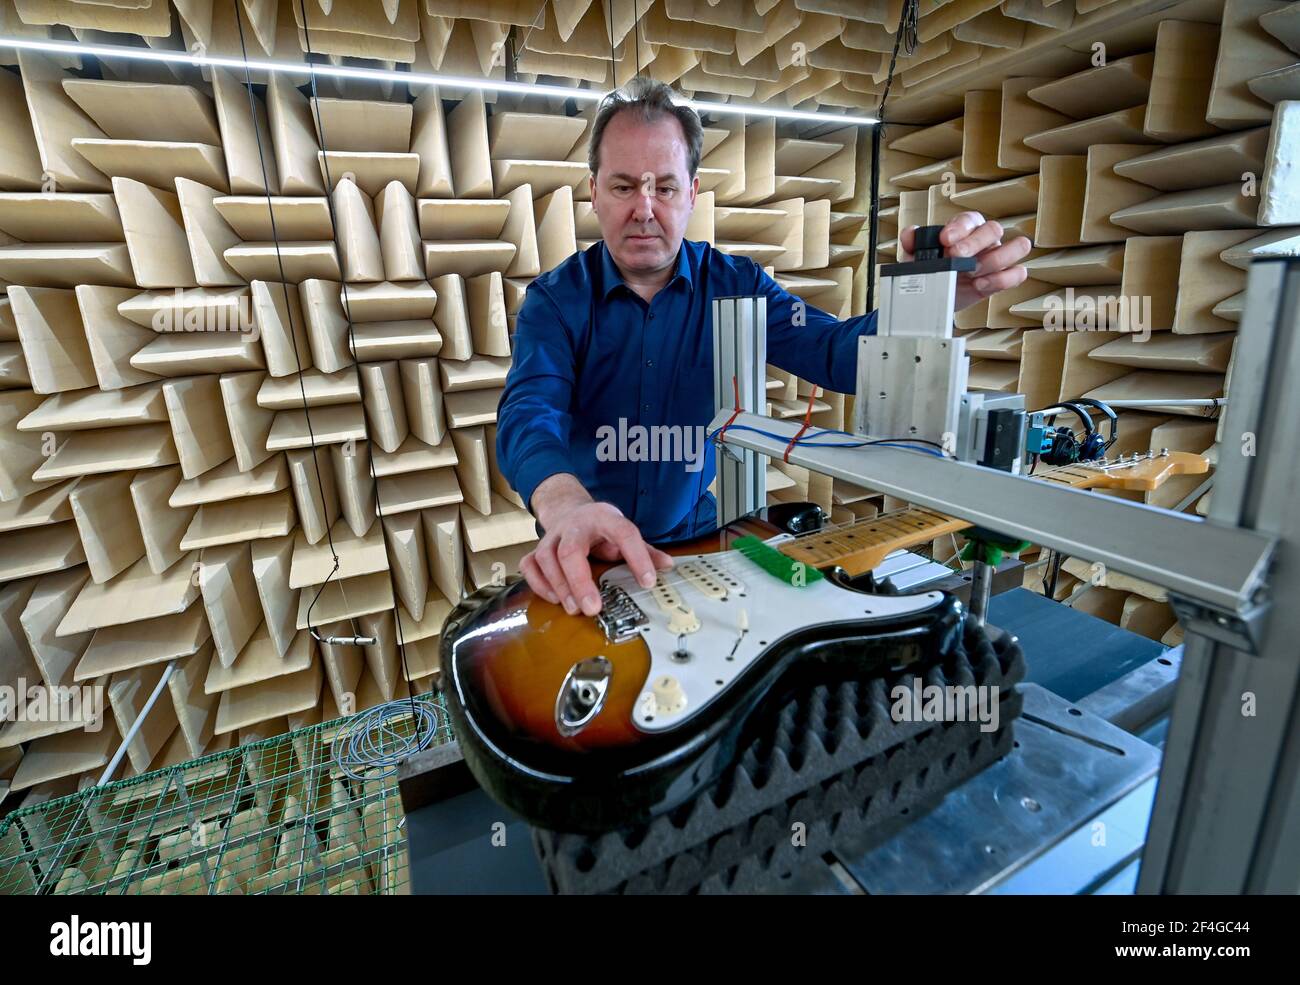 26 February 2021, Saxony, Zwota: Holger Schiema, Managing Director of the Institute for Musical Instrument Making in Zwota, sets up an electric guitar in the anechoic chamber. The institute conducts industry-related research for musical instrument making in Germany. The focus is on the use of various resonance woods for stringed and plucked instruments, manufacturing technologies and design details for the effect of acoustics. There is especially close cooperation with the instrument makers in the Vogtland Musikwinkel, with 120 companies and 1,300 employees one of the largest locations in the Stock Photo